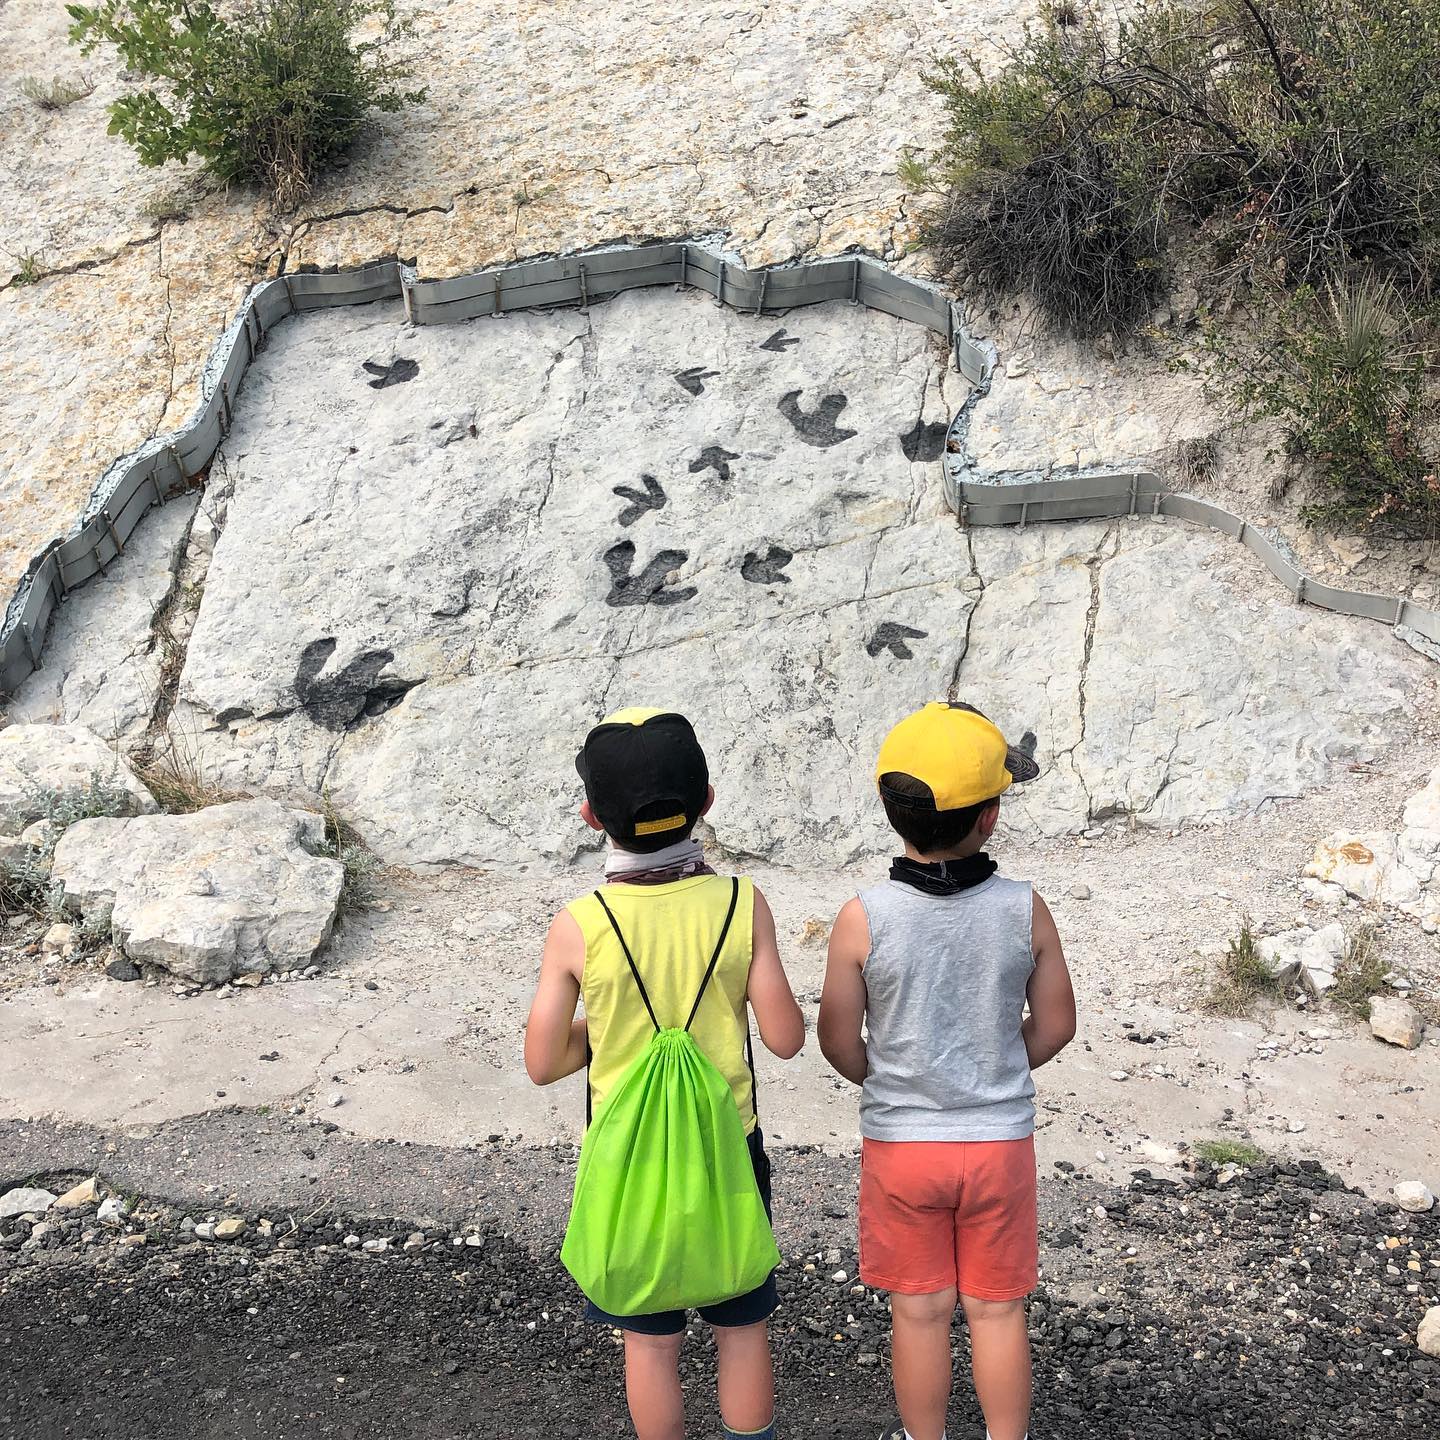 Children looking at fossils at Dinosaur Ridge. Photo by Instagram user @exploringthroughlife